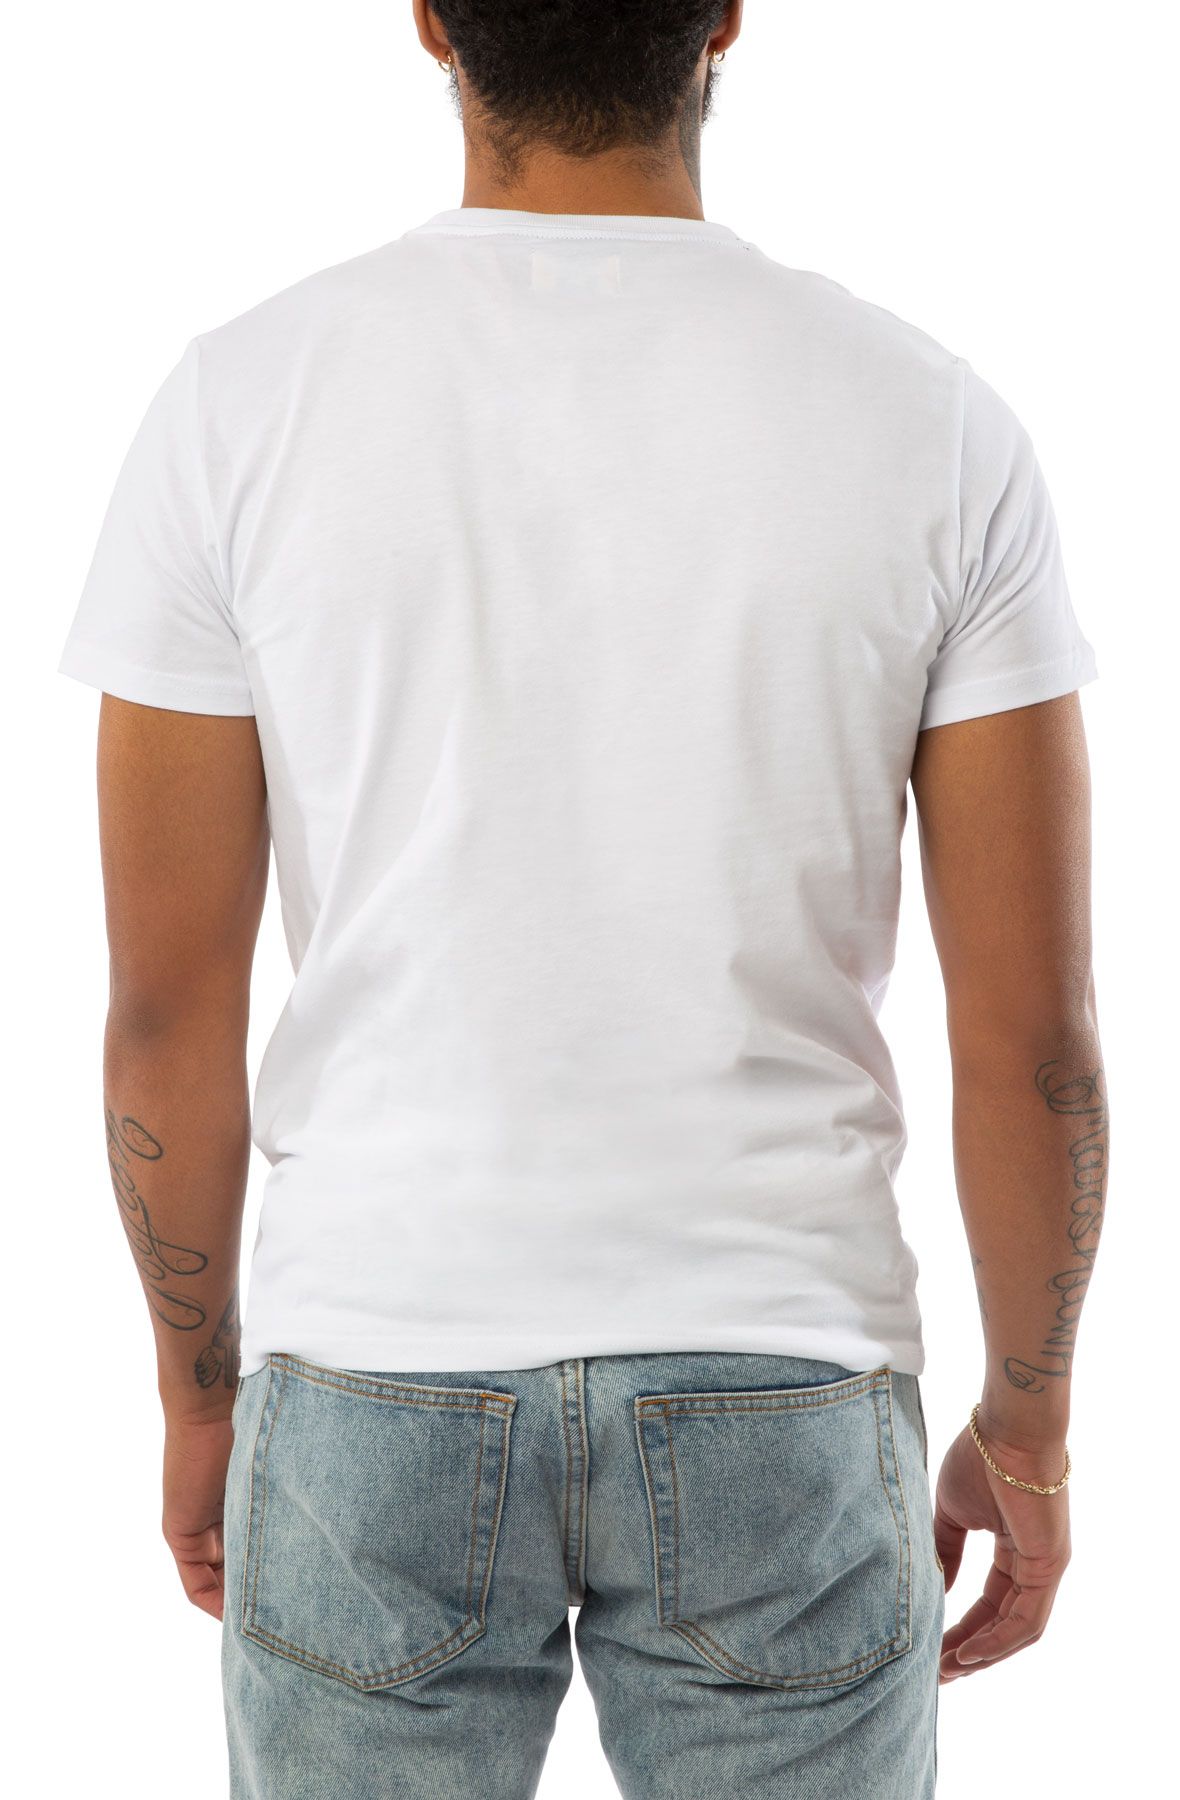 SUPERDRY Port Starboard Short Sleeve Tee M1010414A-WHT - Shiekh